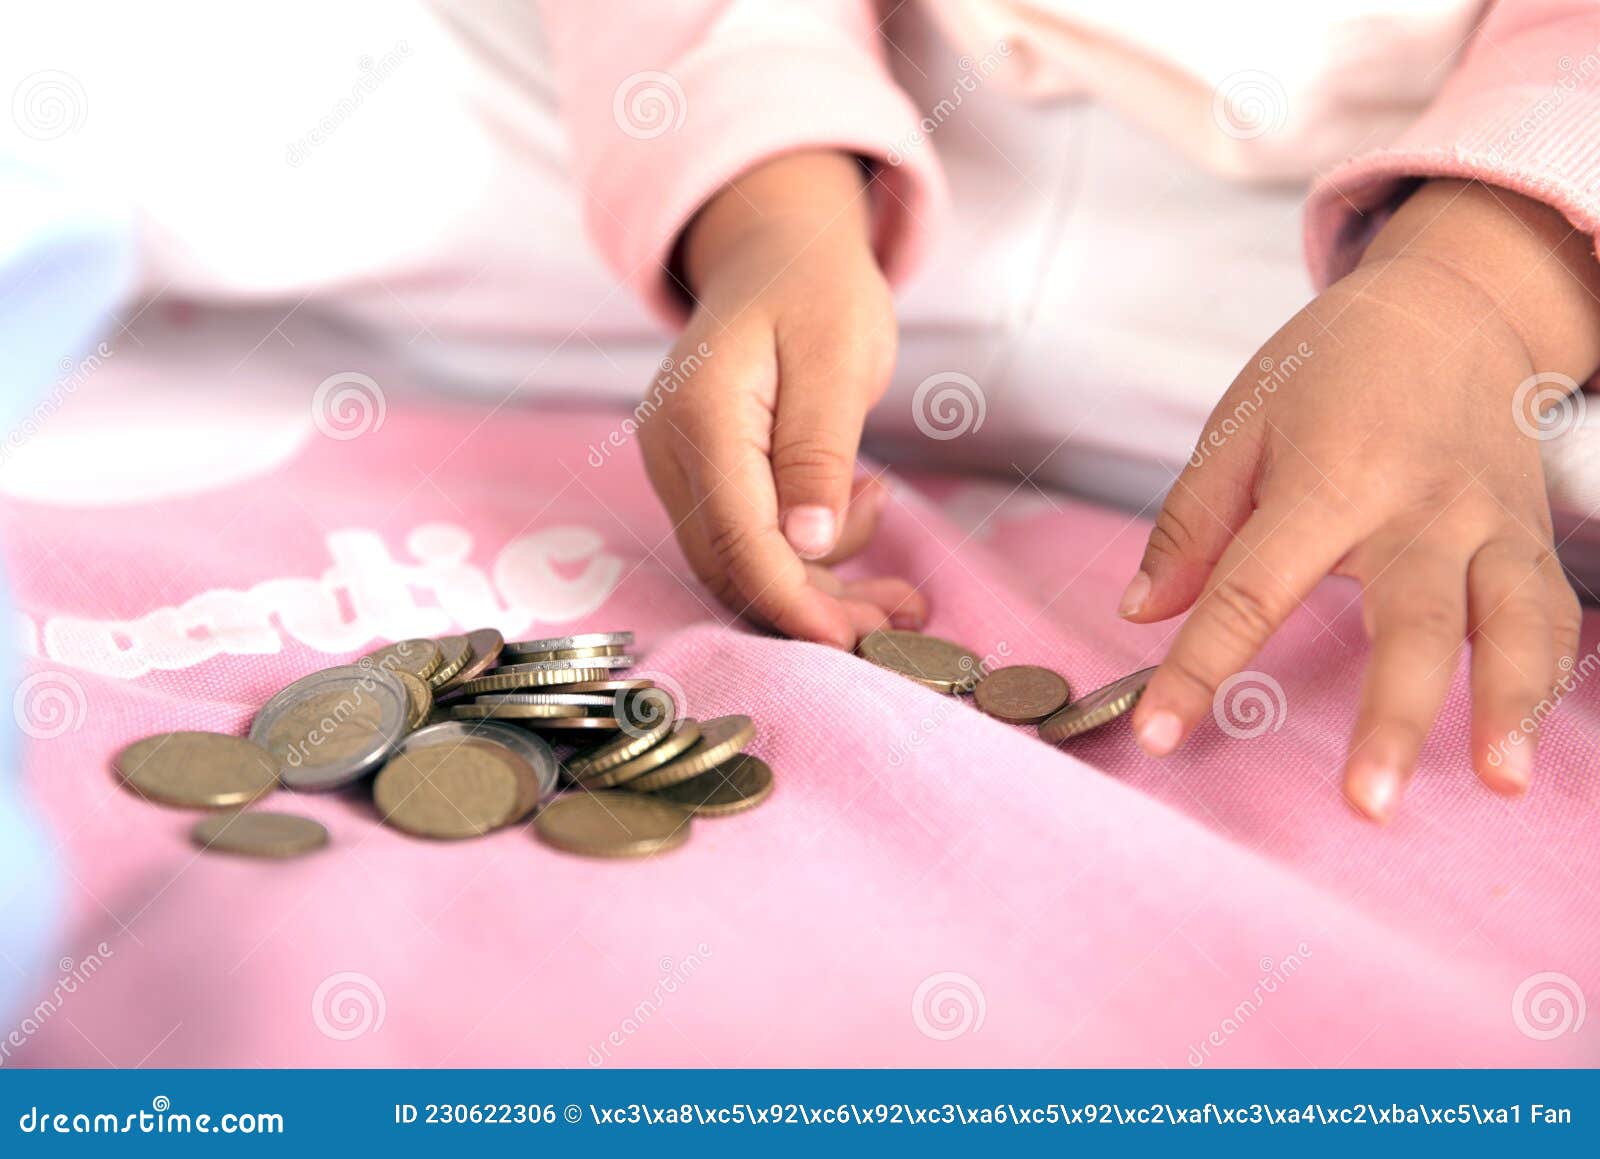 a pair of small hands are playing with euro coins